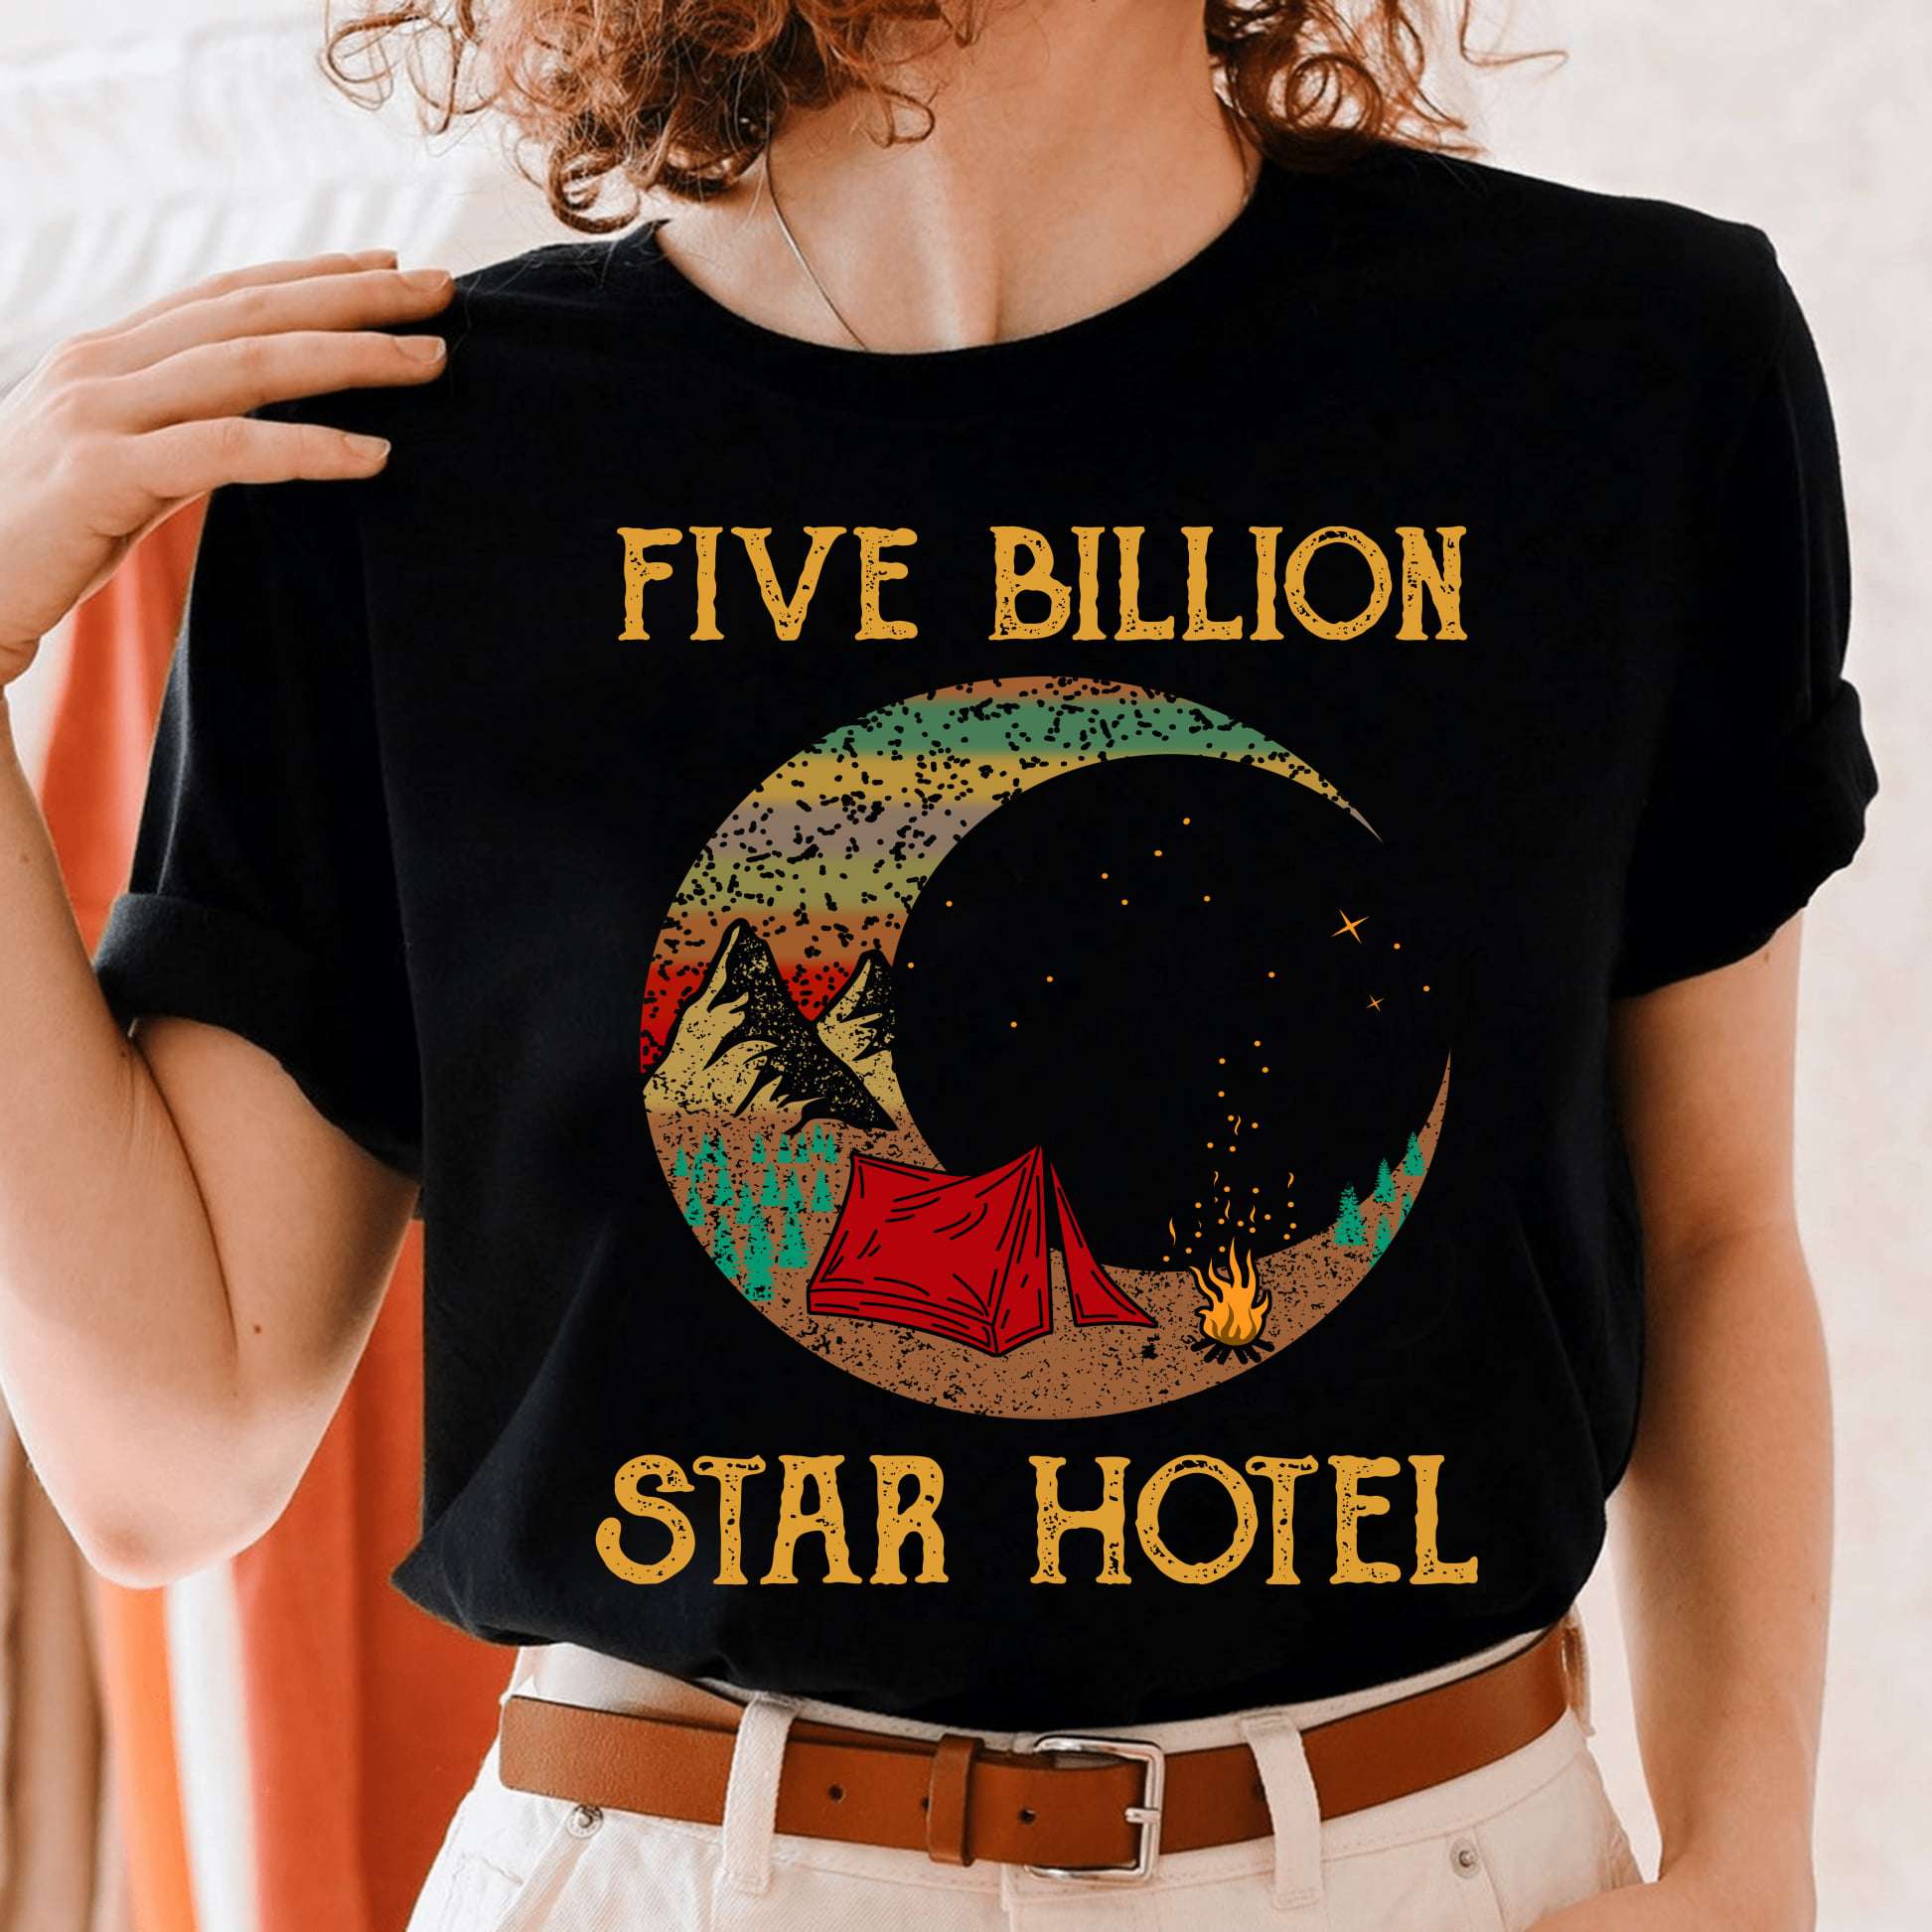 Five billion star hotel - Tent for camping, camping the hobby